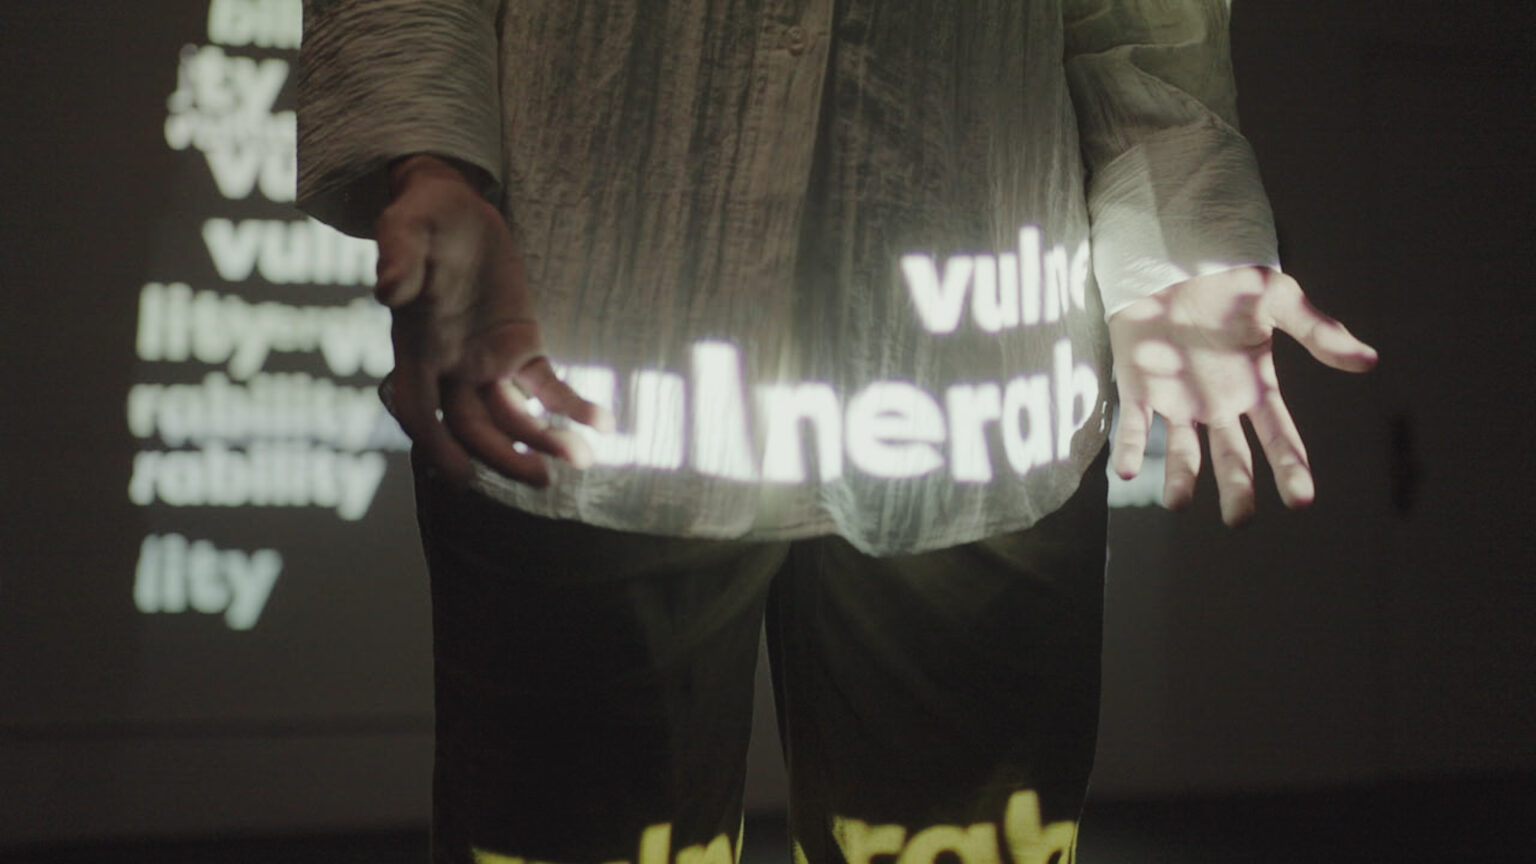 The lower midsection and upper thighs of person is seen. This person is wearing a white button up shirt, the word 'vulnerability' is projected repeatedly over them, and a screen behind them also shows this projection.